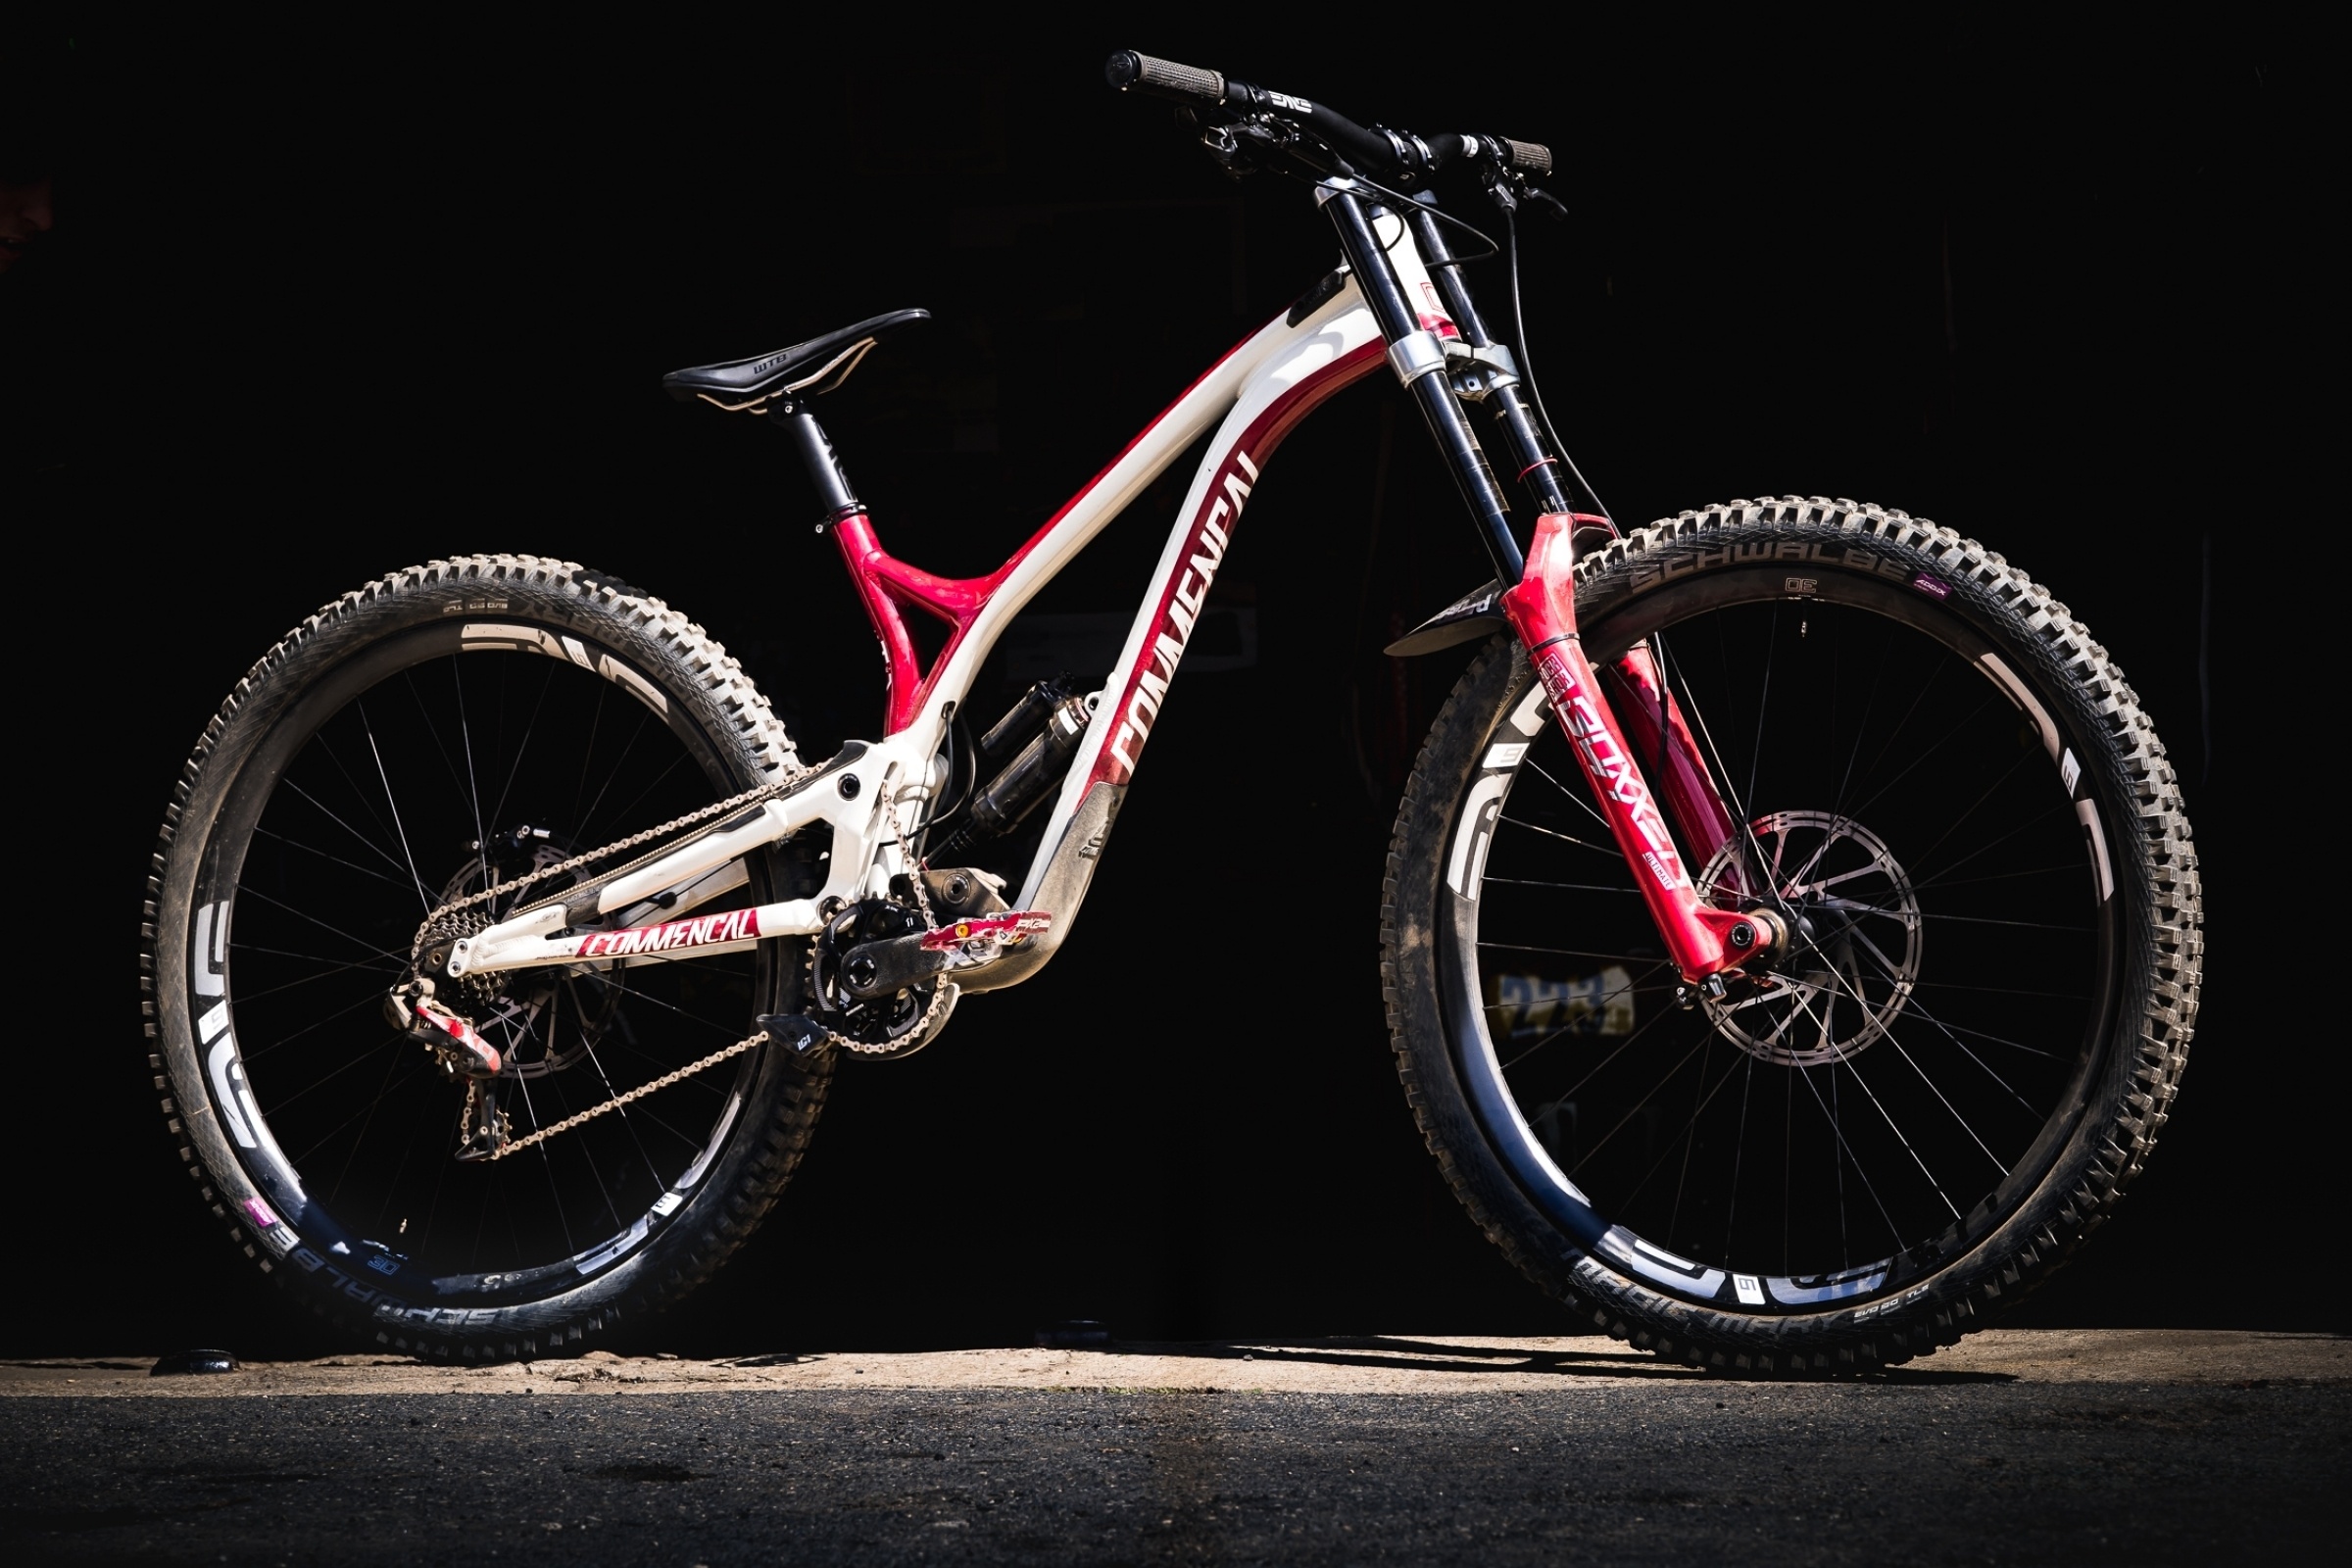 Commencal, Free Commencal images, Download for free, 2400x1600 HD Desktop